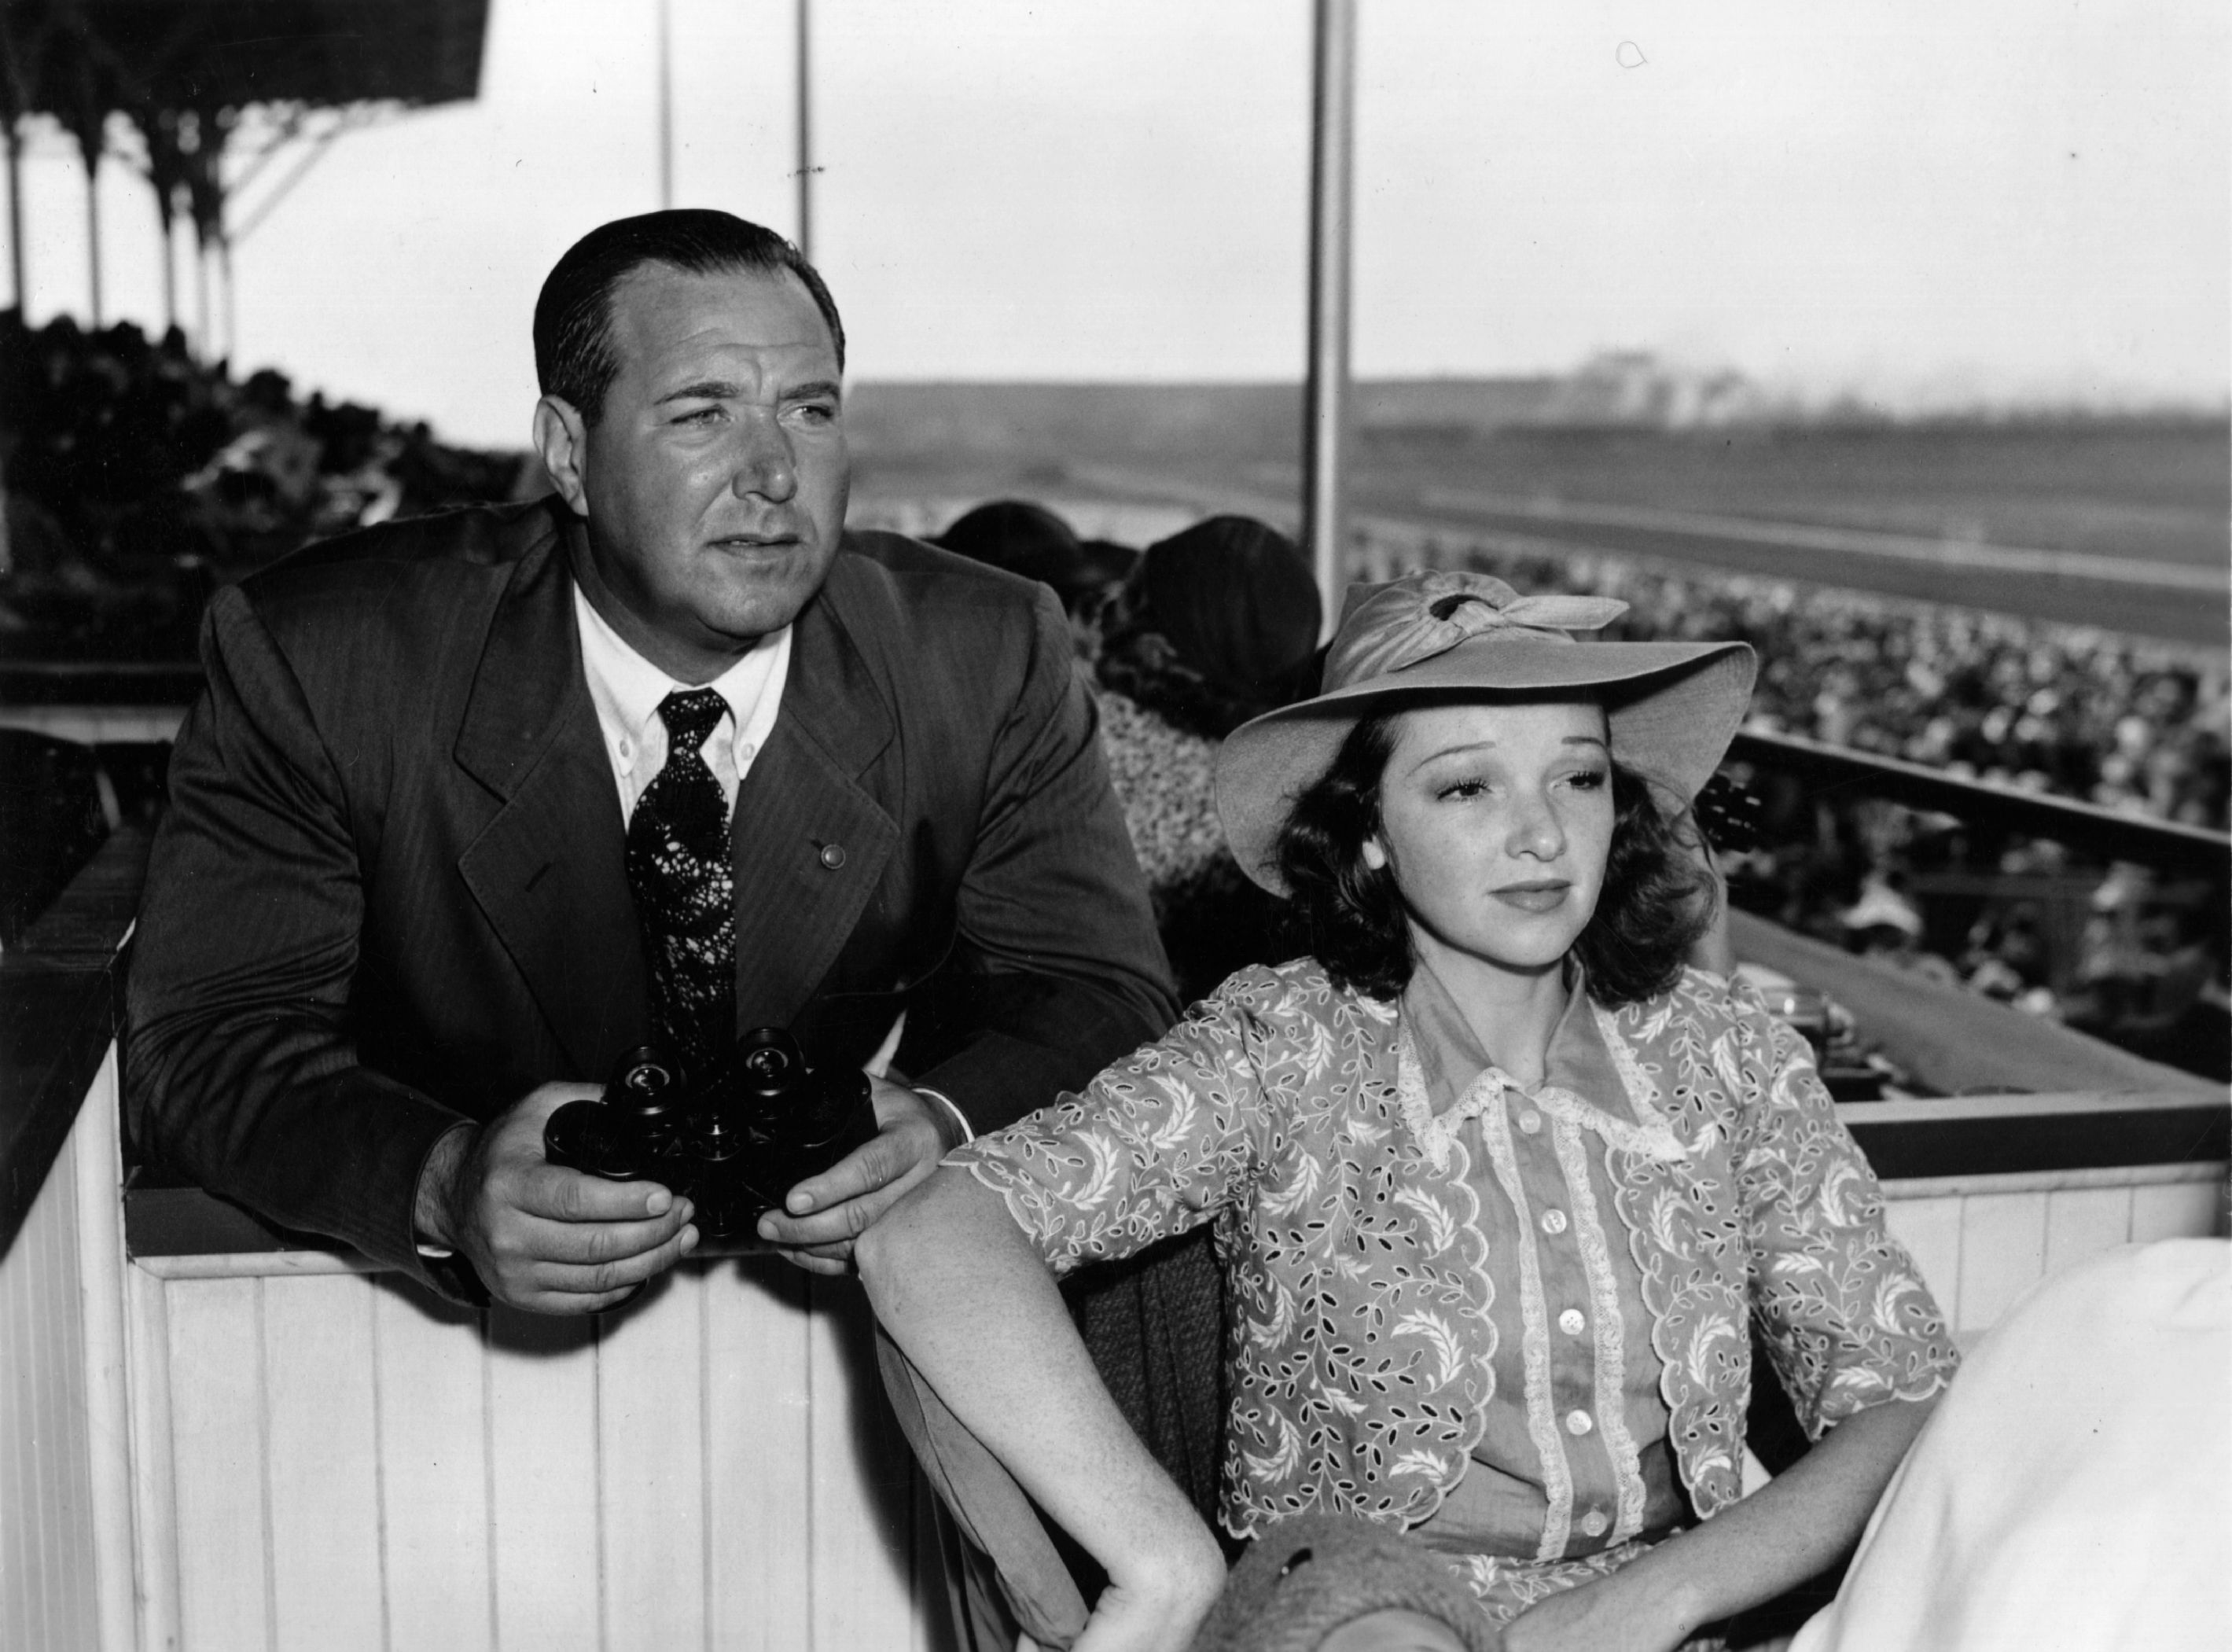 Director Dave Butler and Dixie Lee Crosby pictured watching a race in 1940. | Photo: Getty Images